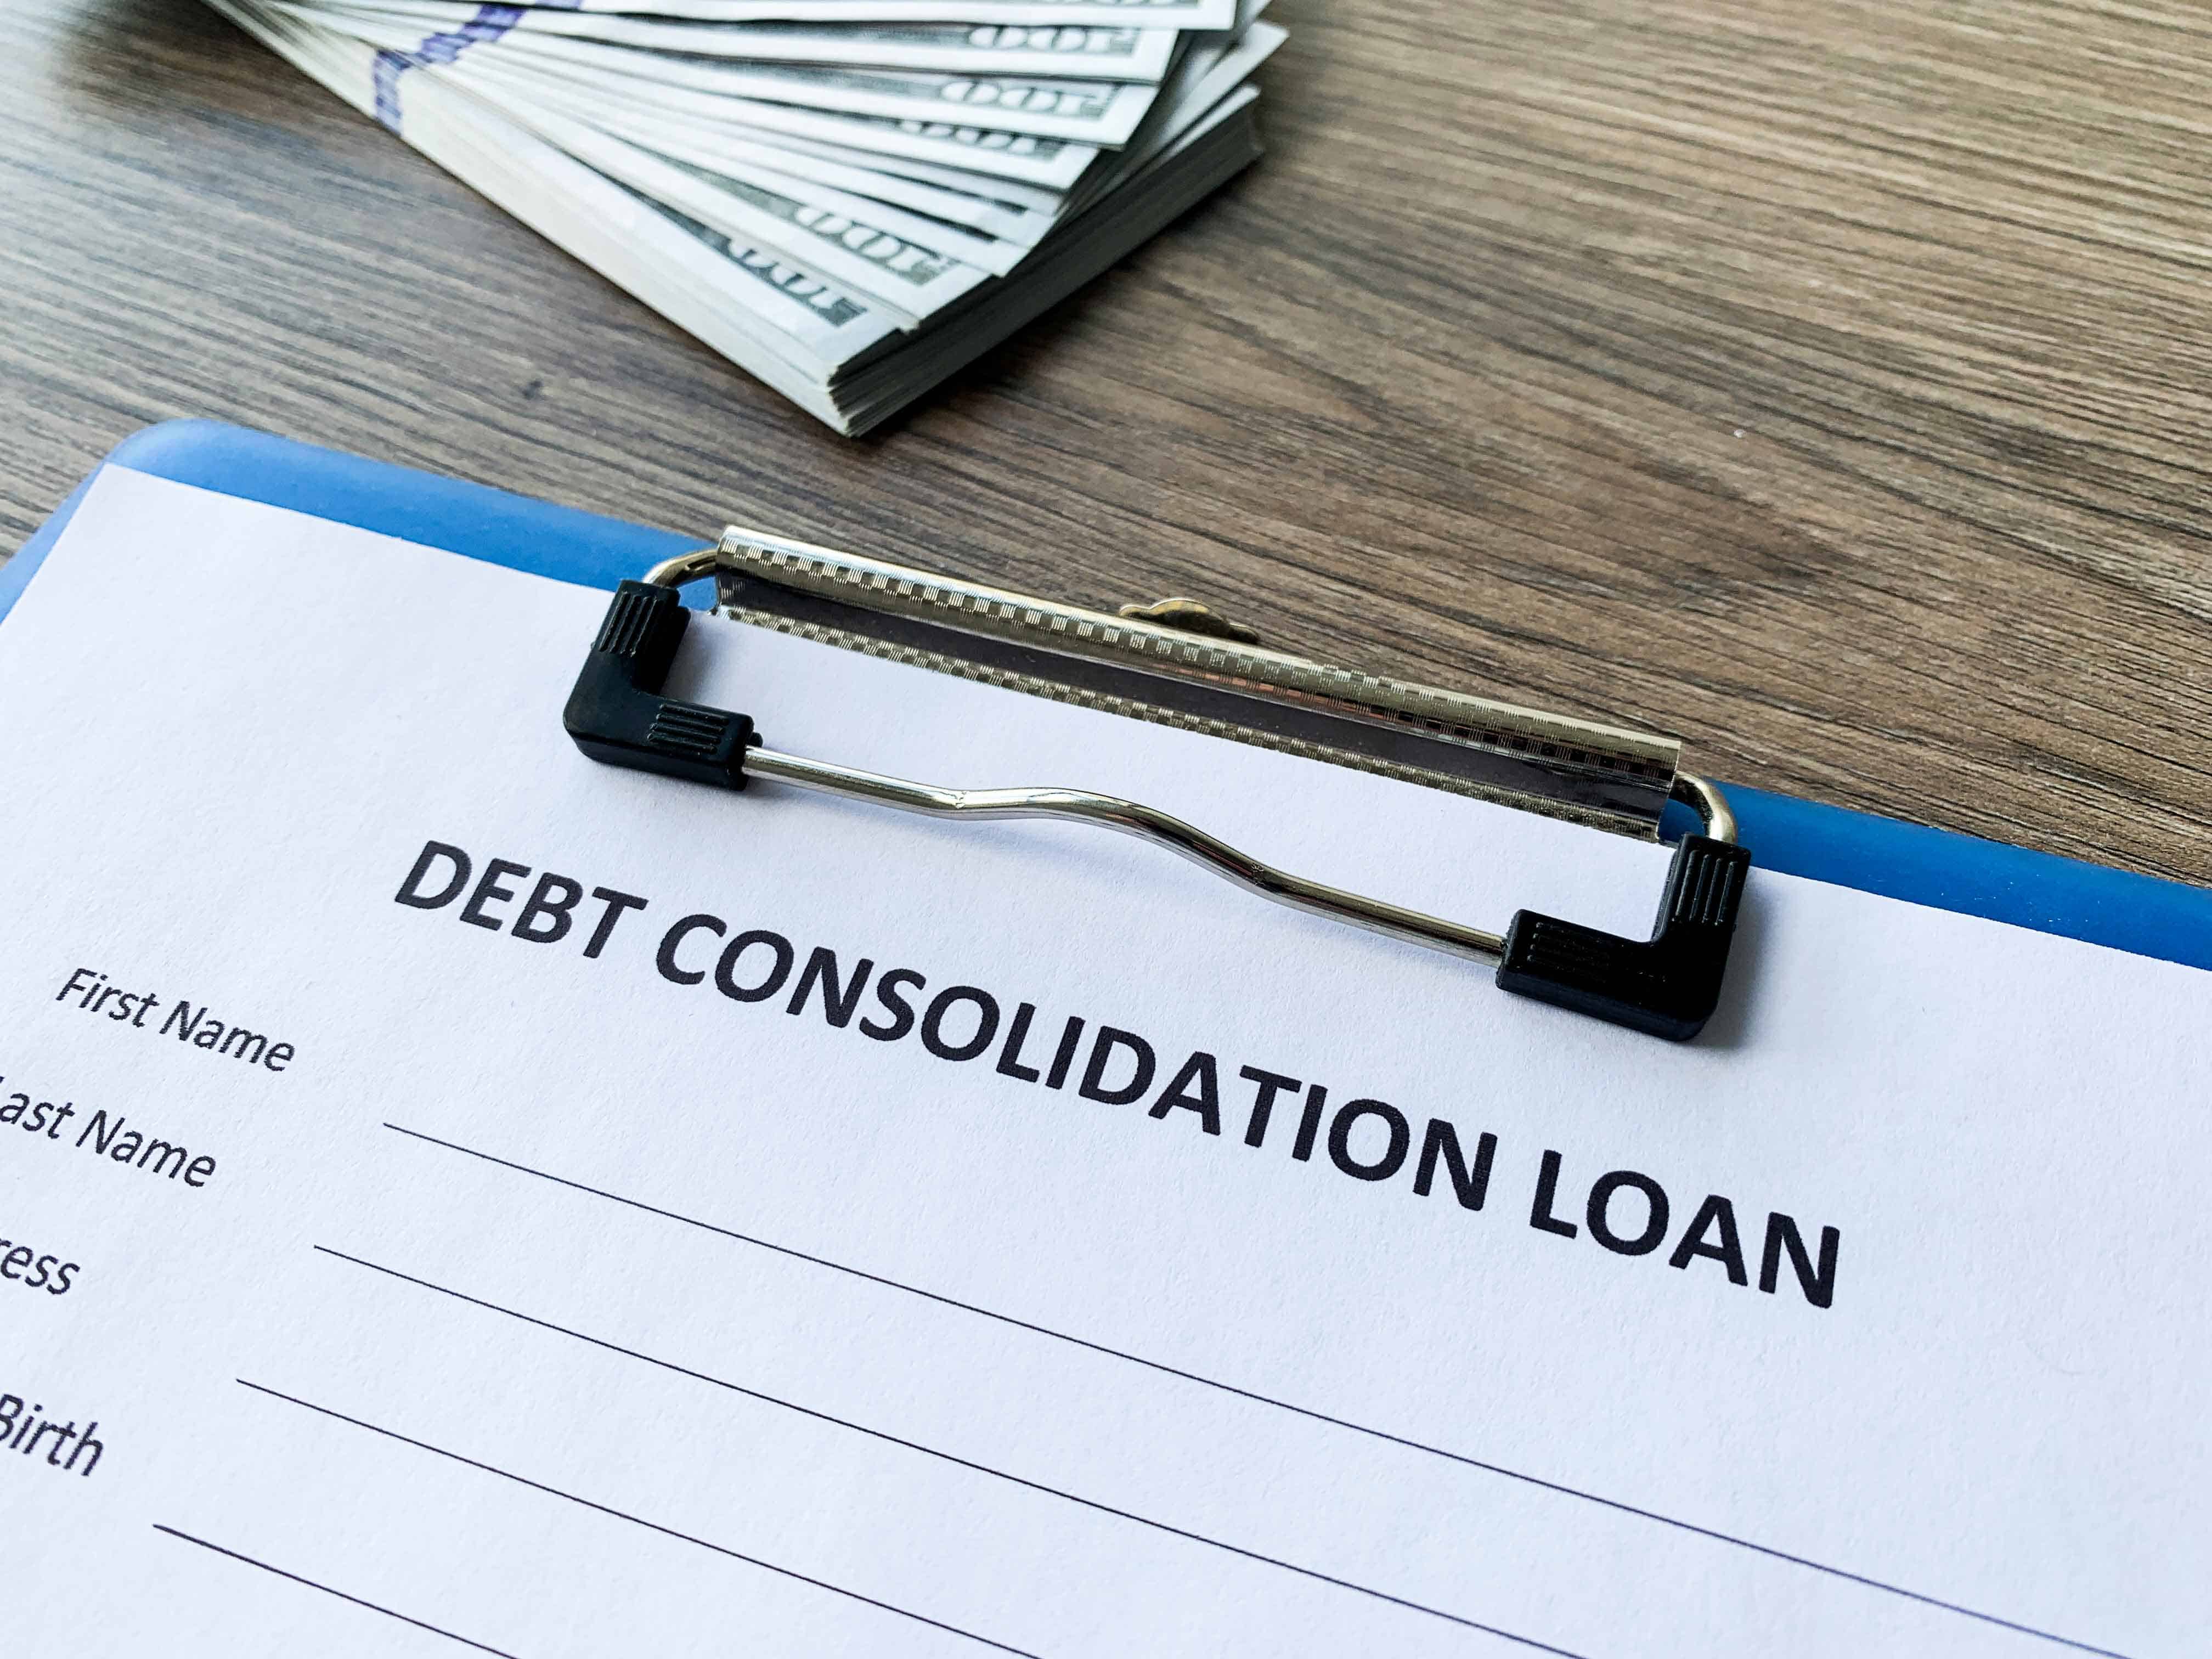 How to use a personal loan for debt consolidation